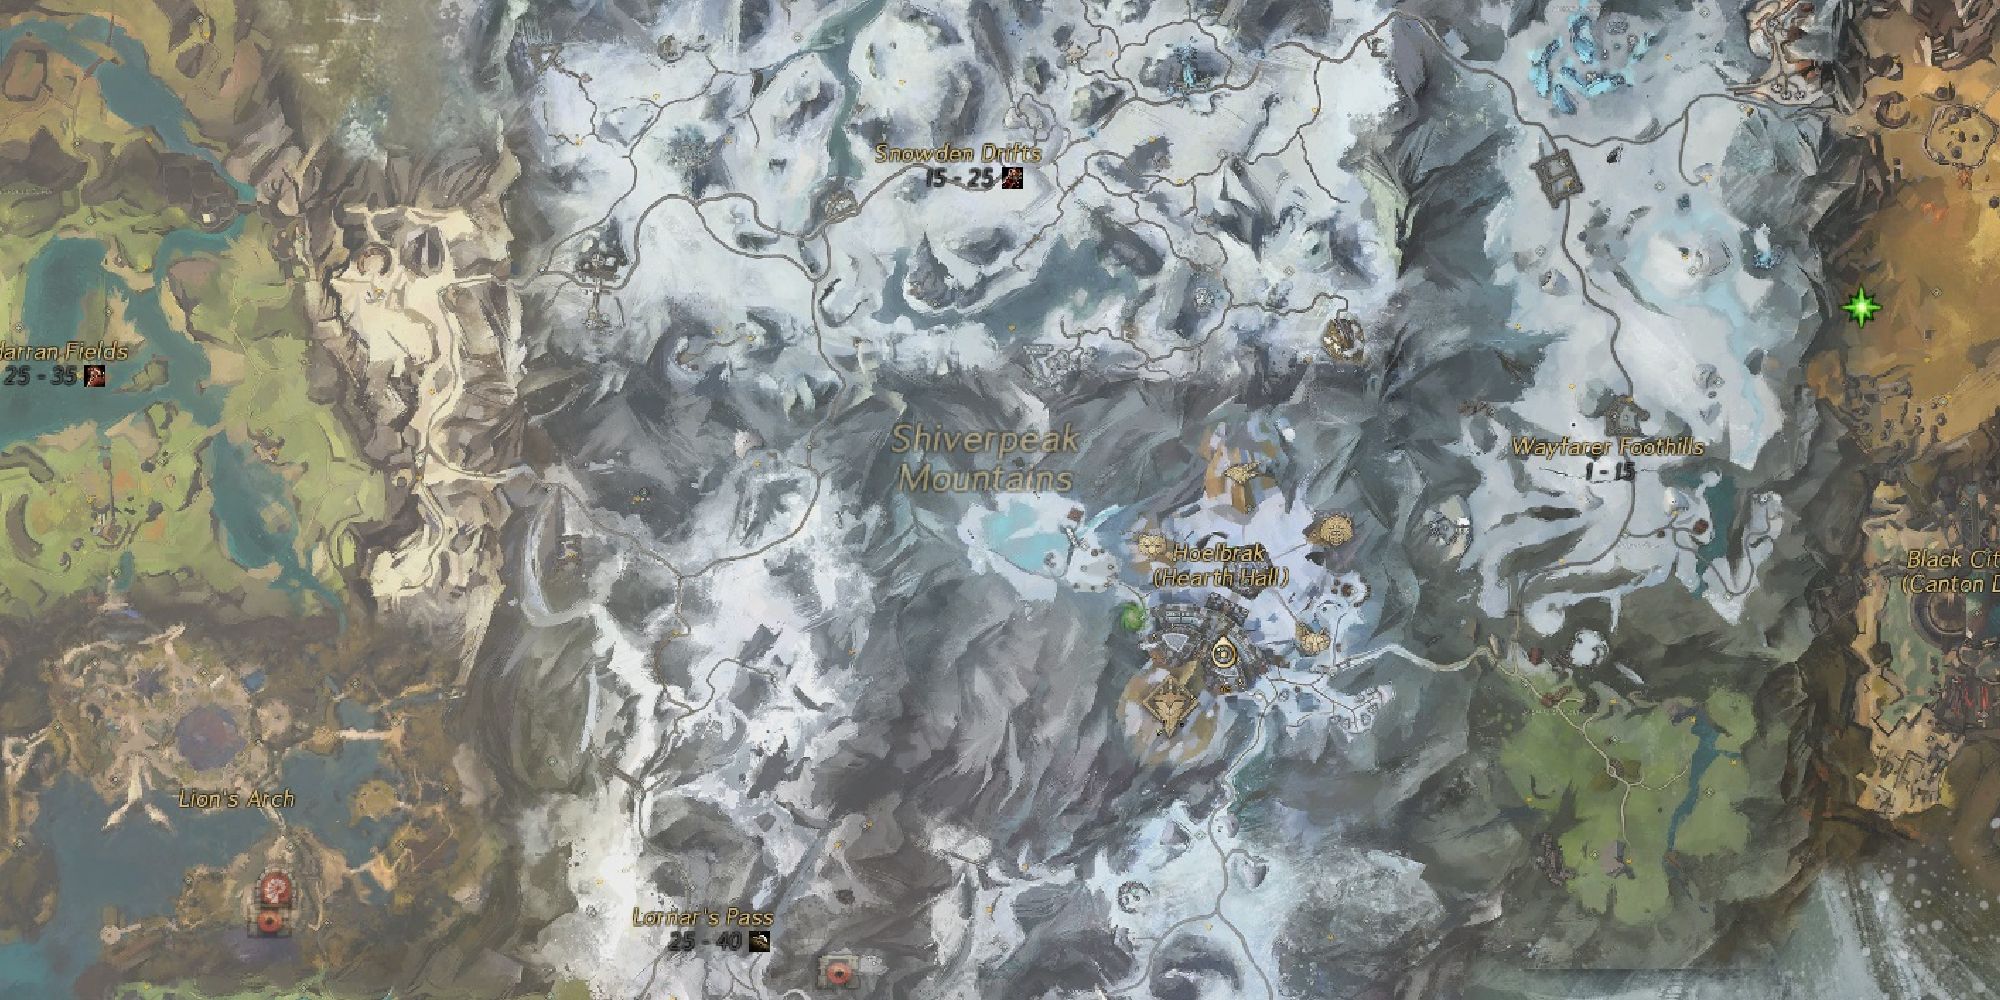 shiverpeak mountain areas shown on map of tyria